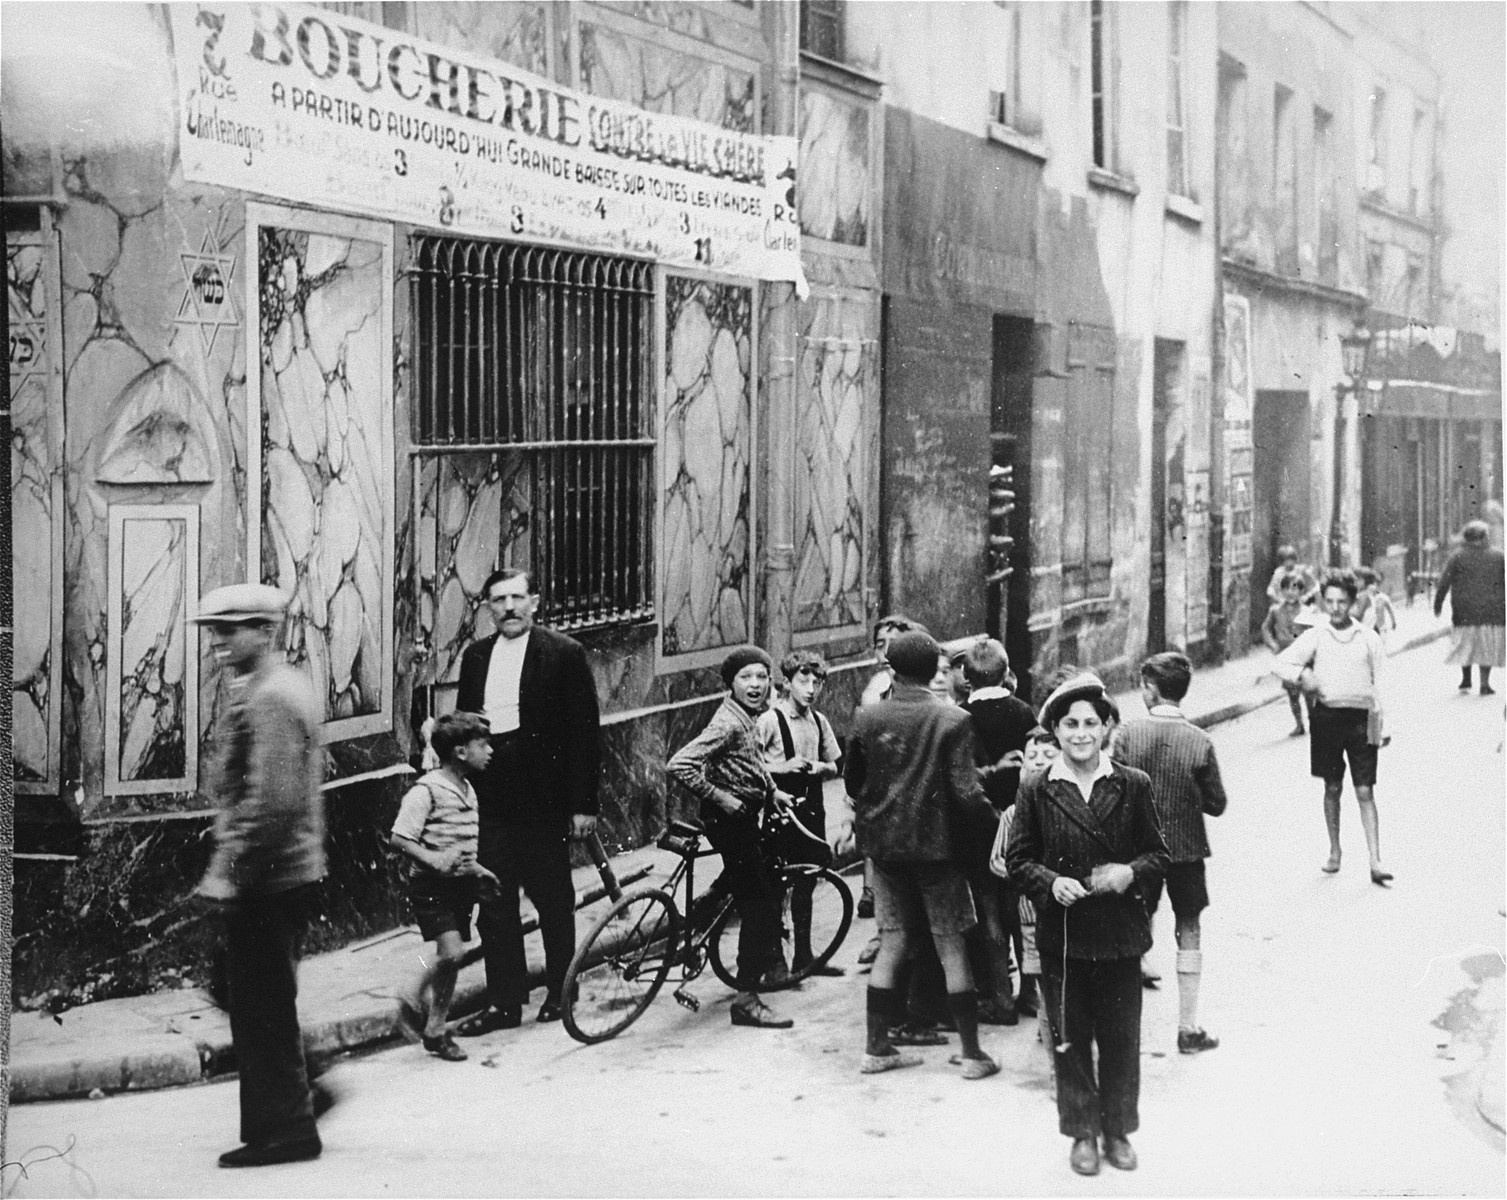 Children playing on a street in the Jewish quarter of Paris.